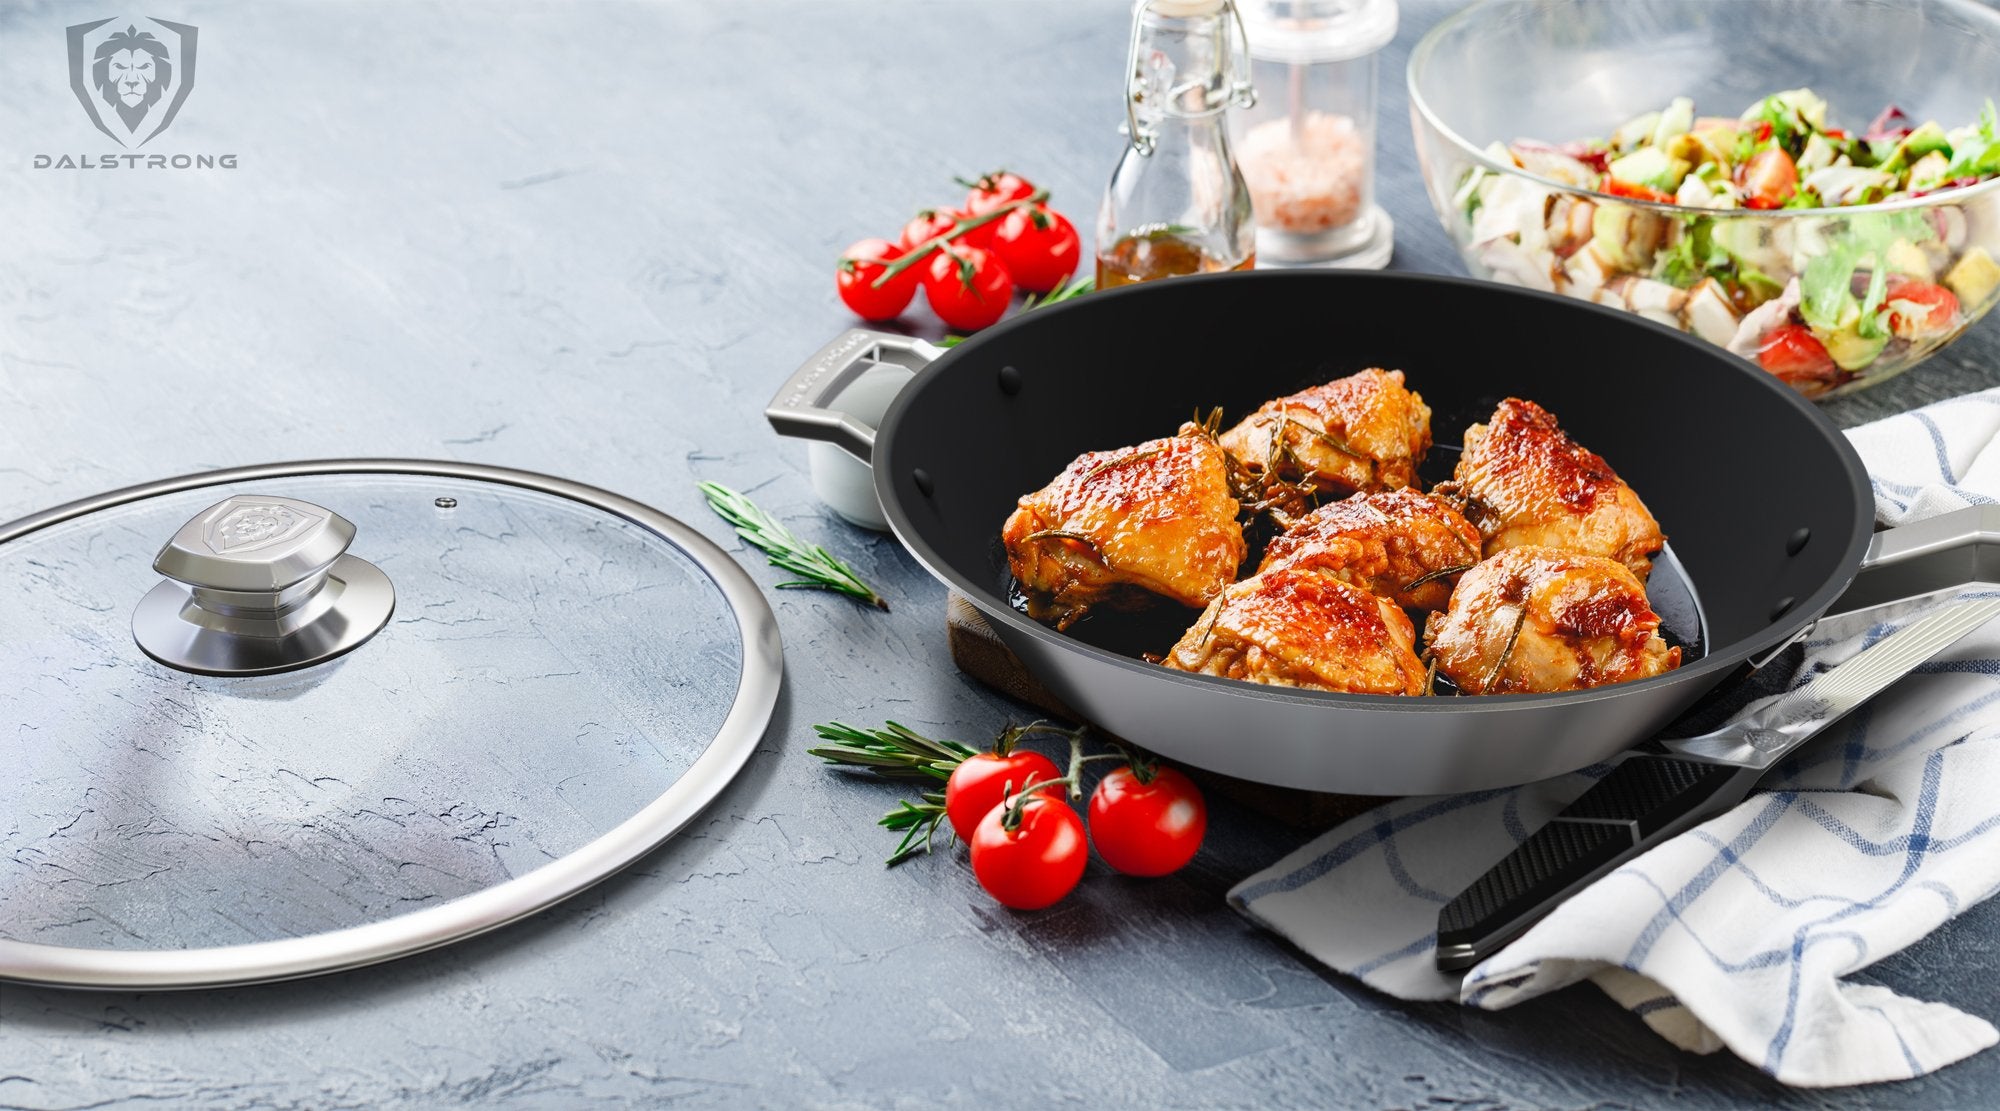 imarku Cast Iron Skillets, 12 Inch Cast Iron Pan, Professional Non Stick  Frying Pans Long Lasting Nonstick Frying Pan Nonstick Pan, Stay Cool  Handle